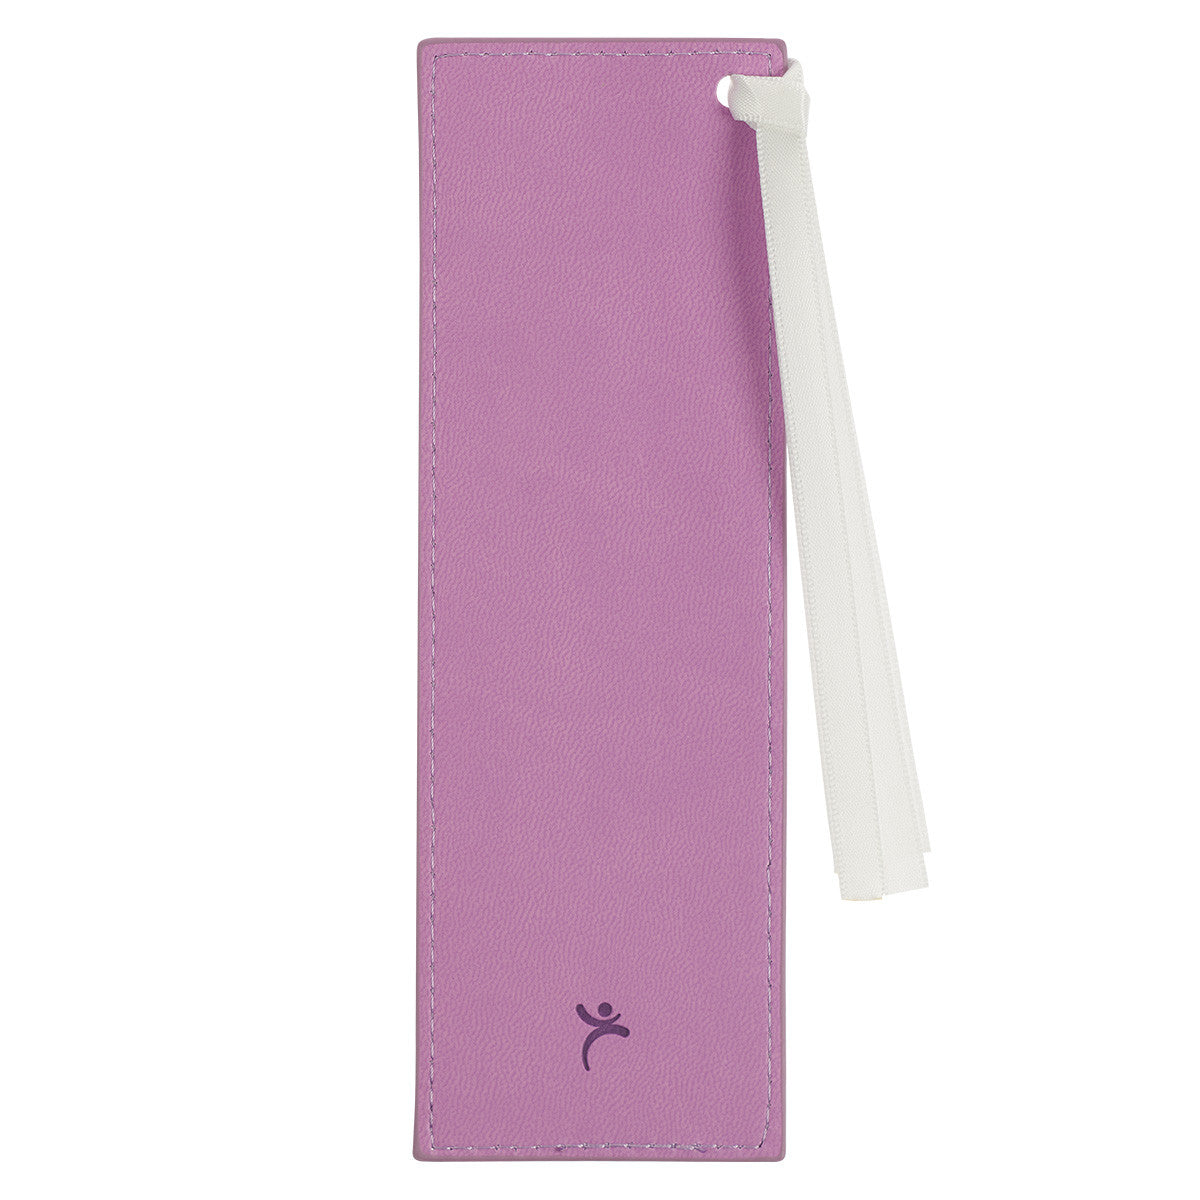 Be Still and Know Lilac Faux Leather Bookmark - Psalm 46:10